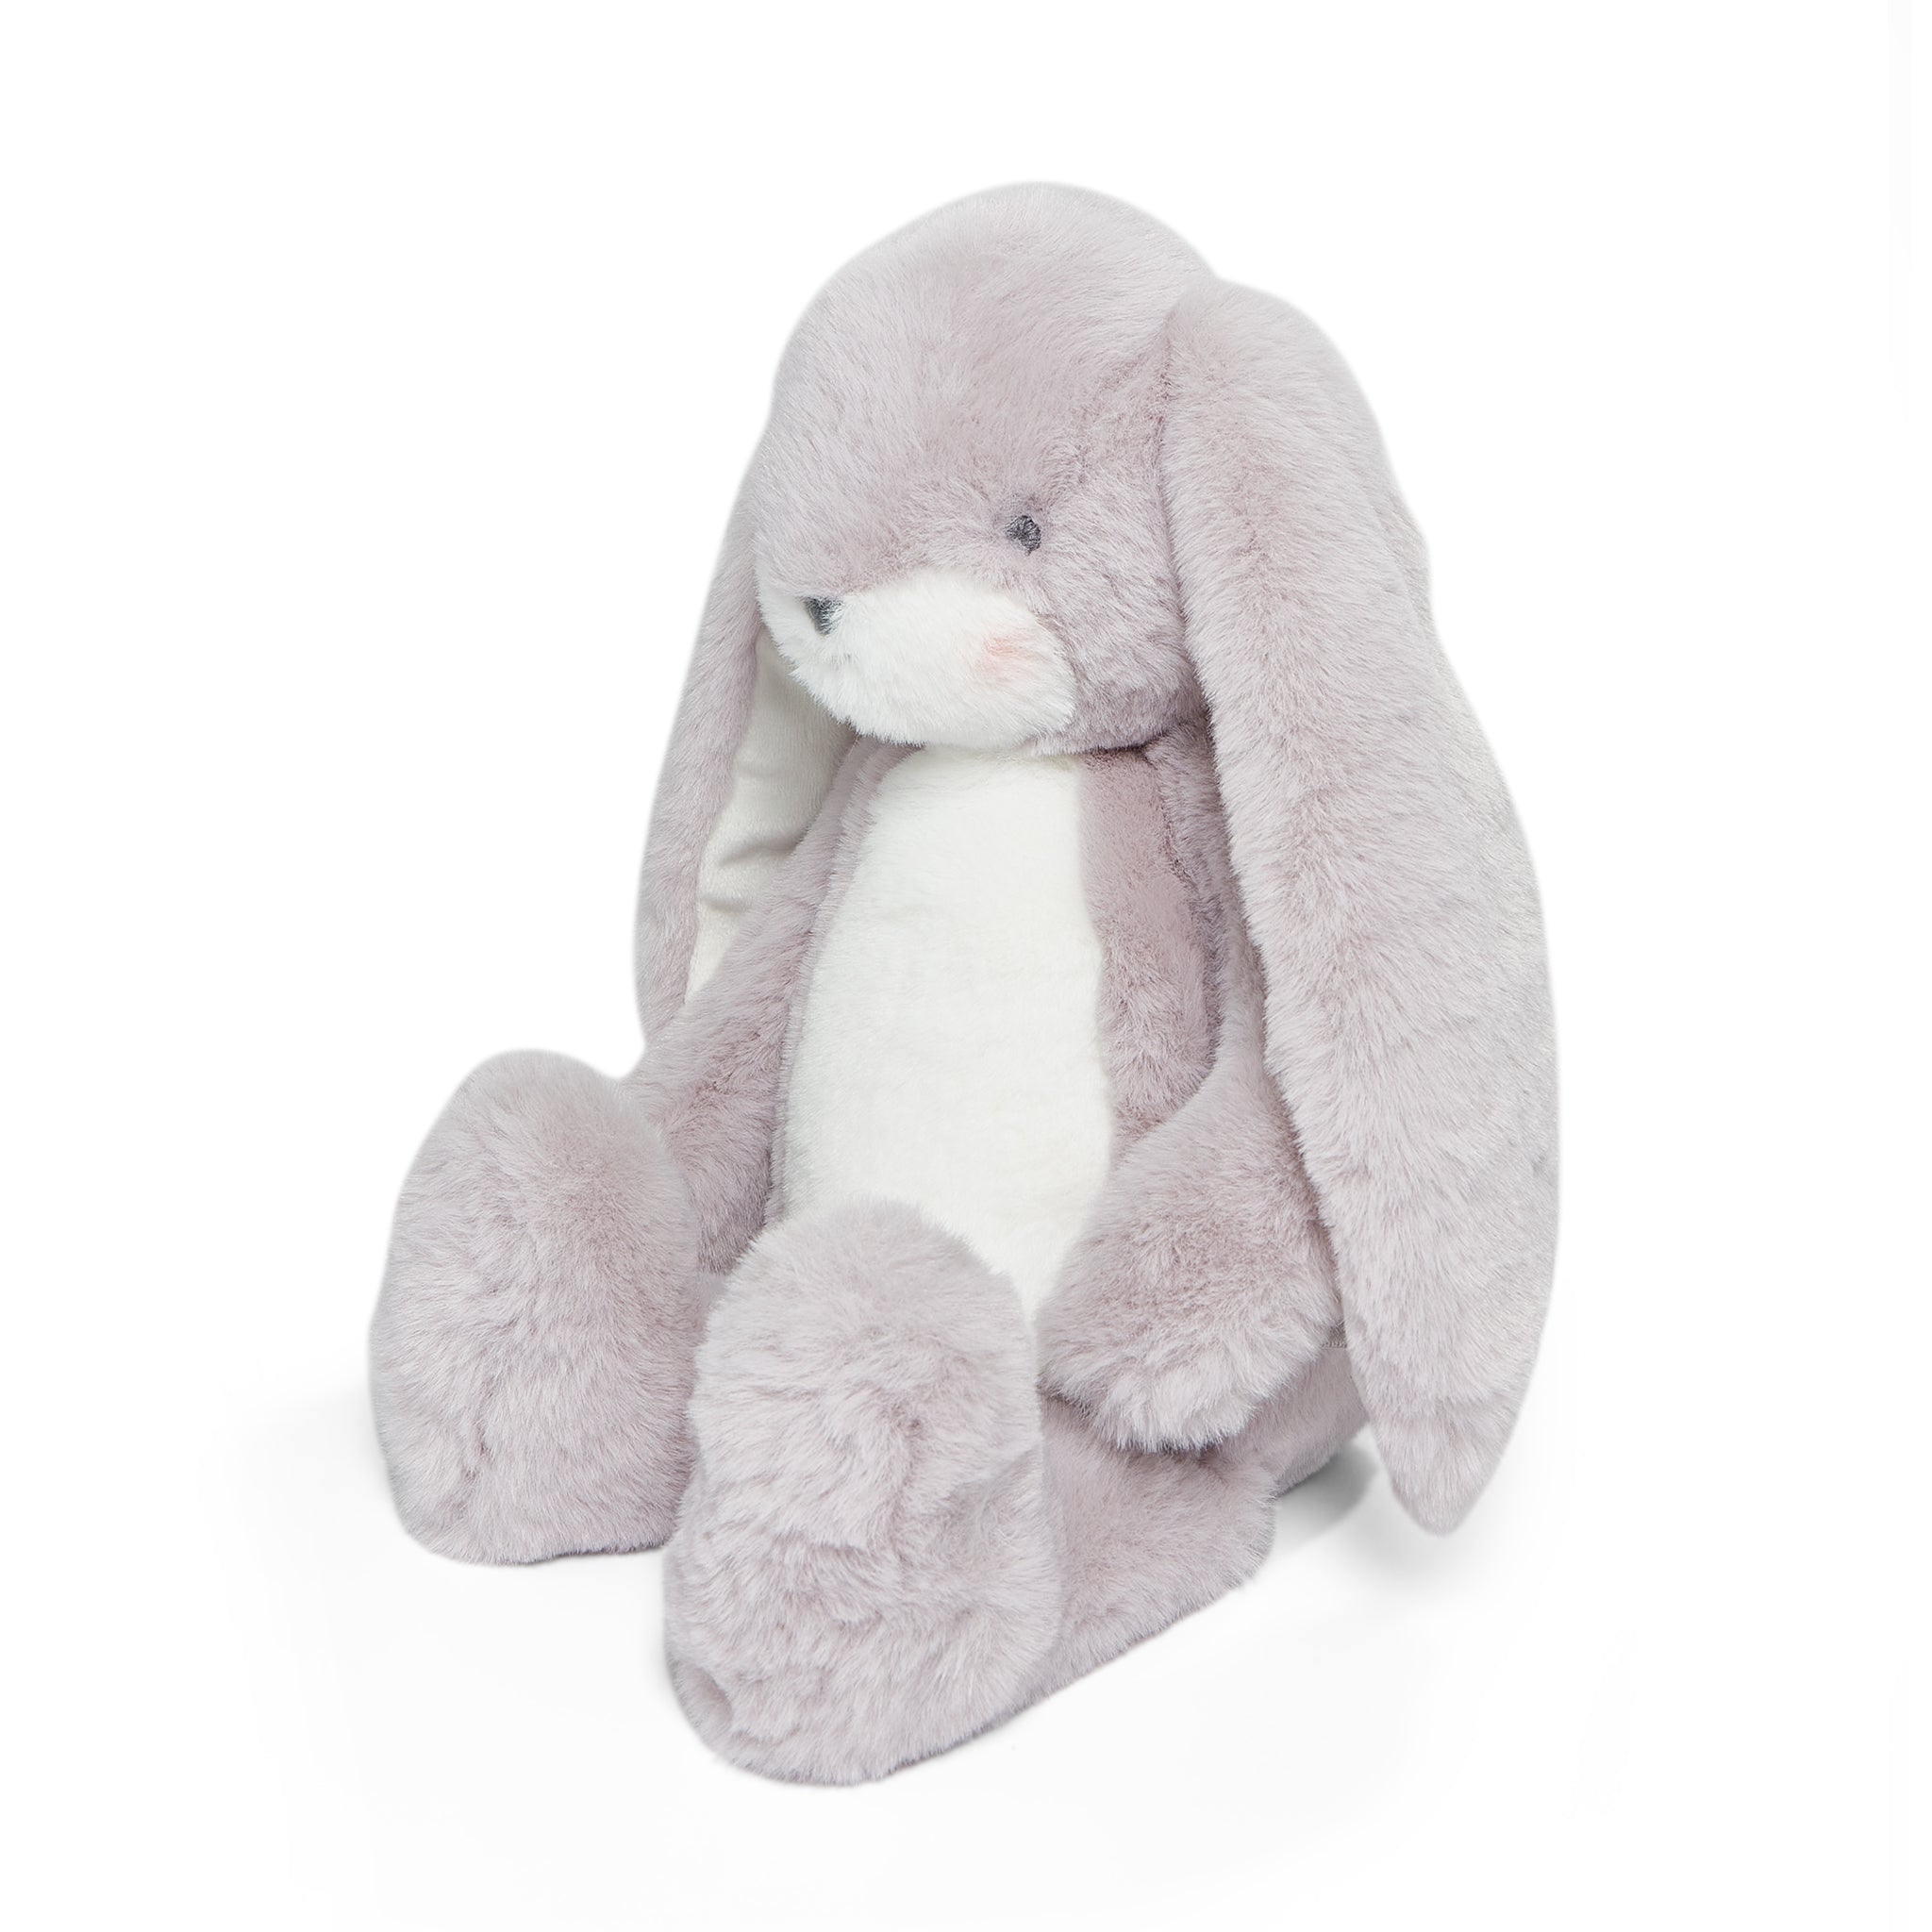 Little Floppy Nibble 12" Bunny - Lilac Marble-Stuffed Animal-SKU: 104400 - Bunnies By The Bay